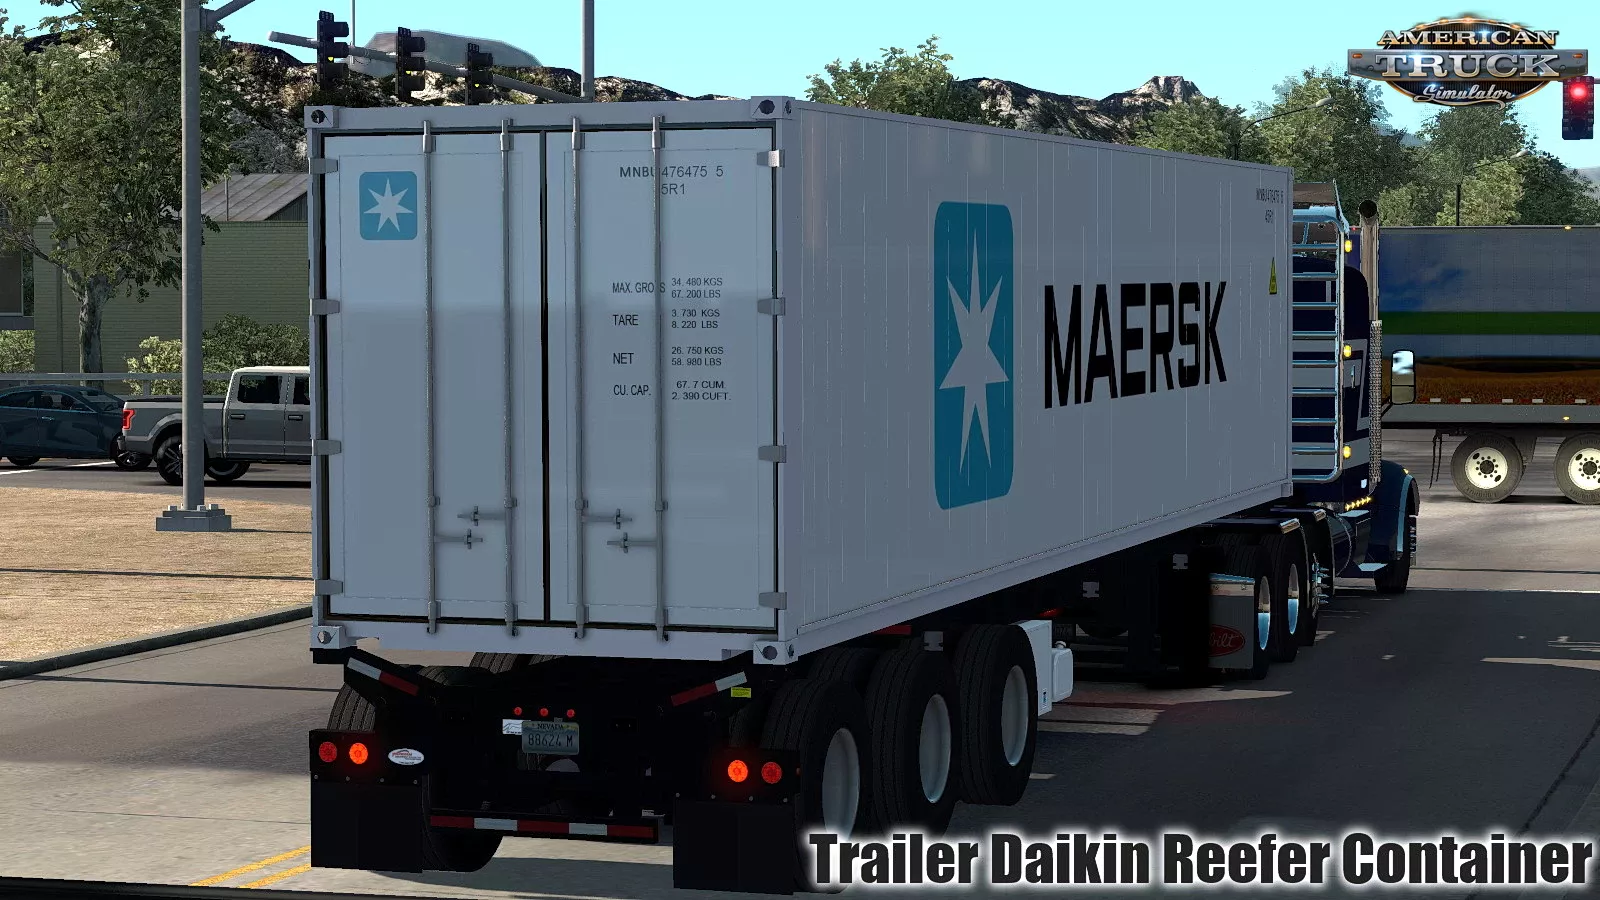 Trailer Daikin Reefer Container v1.2 (1.49.x) for ATS